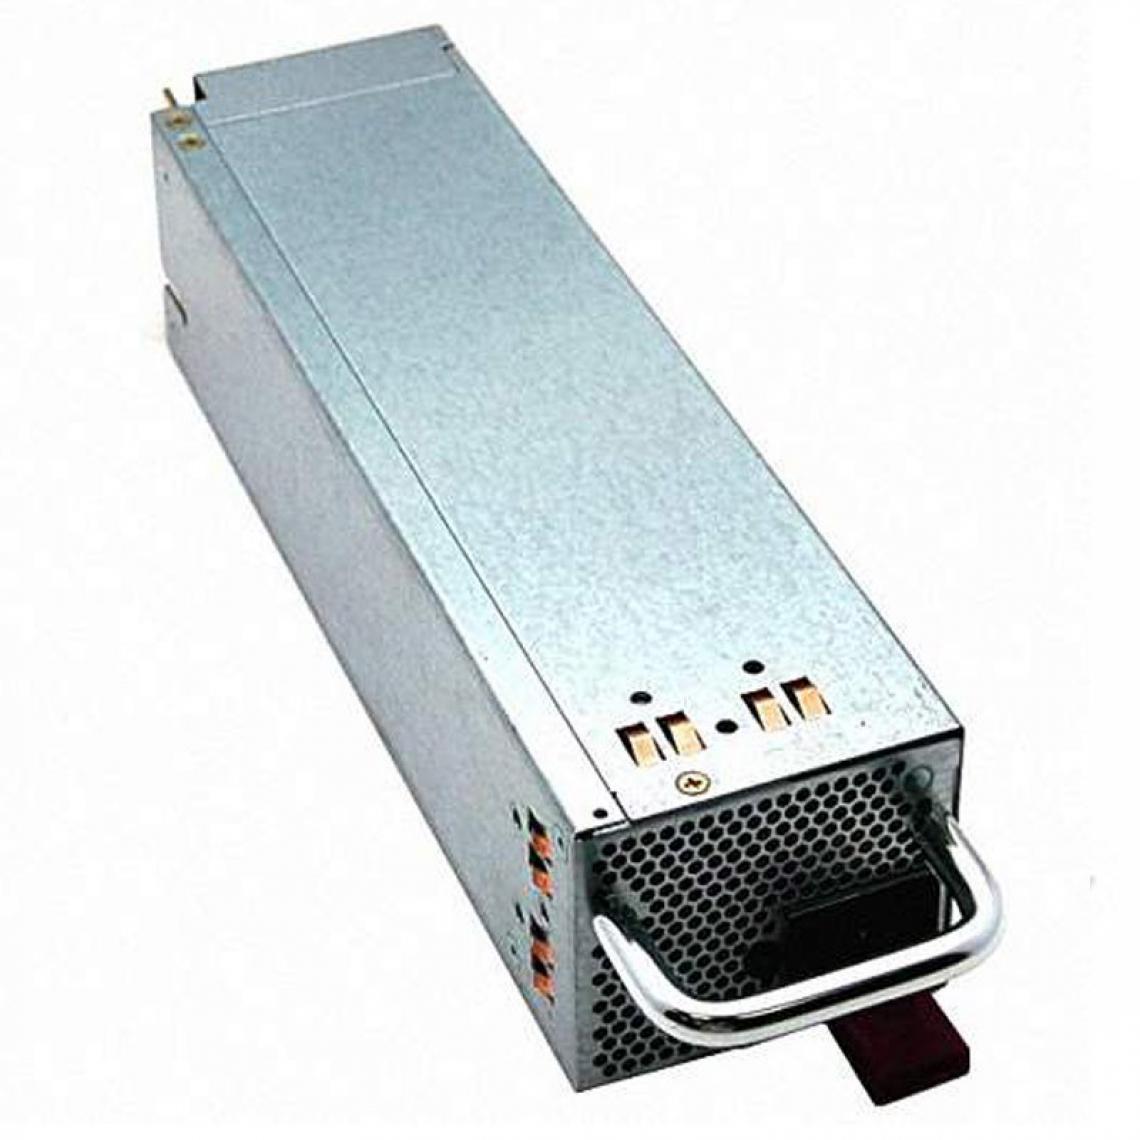 Dell - Alimentation HP PS-3381-1C2 400 Watts ESP113A Series 339596-001 Power Supply - Alimentation modulaire